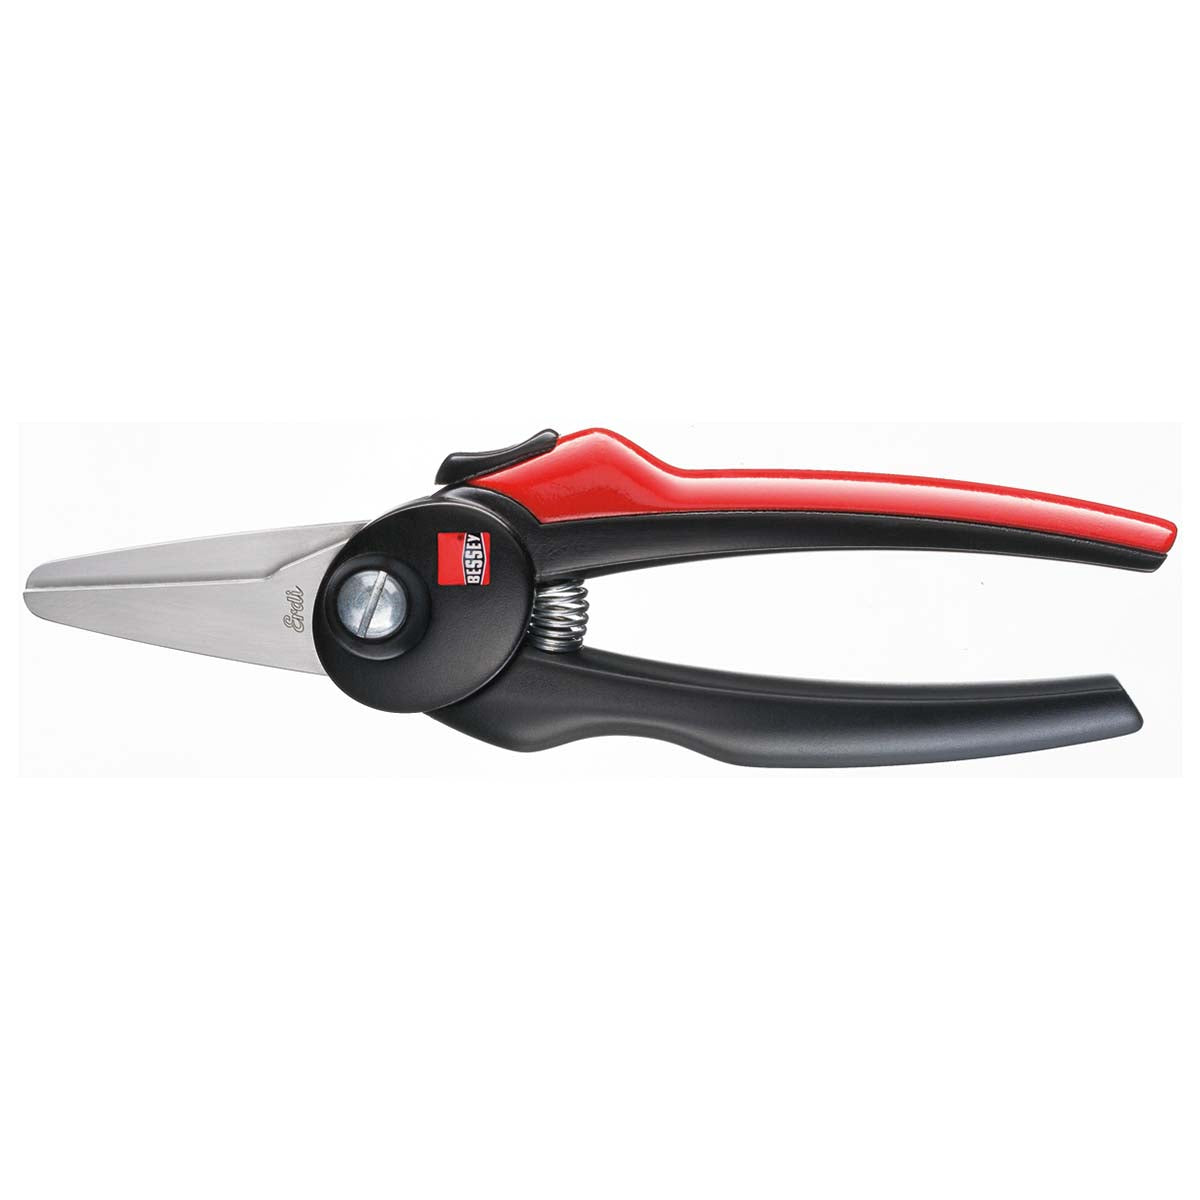 Bessey D48-2 - Bessey D48-2 Straight Universal Scissors with Two-Component Handles